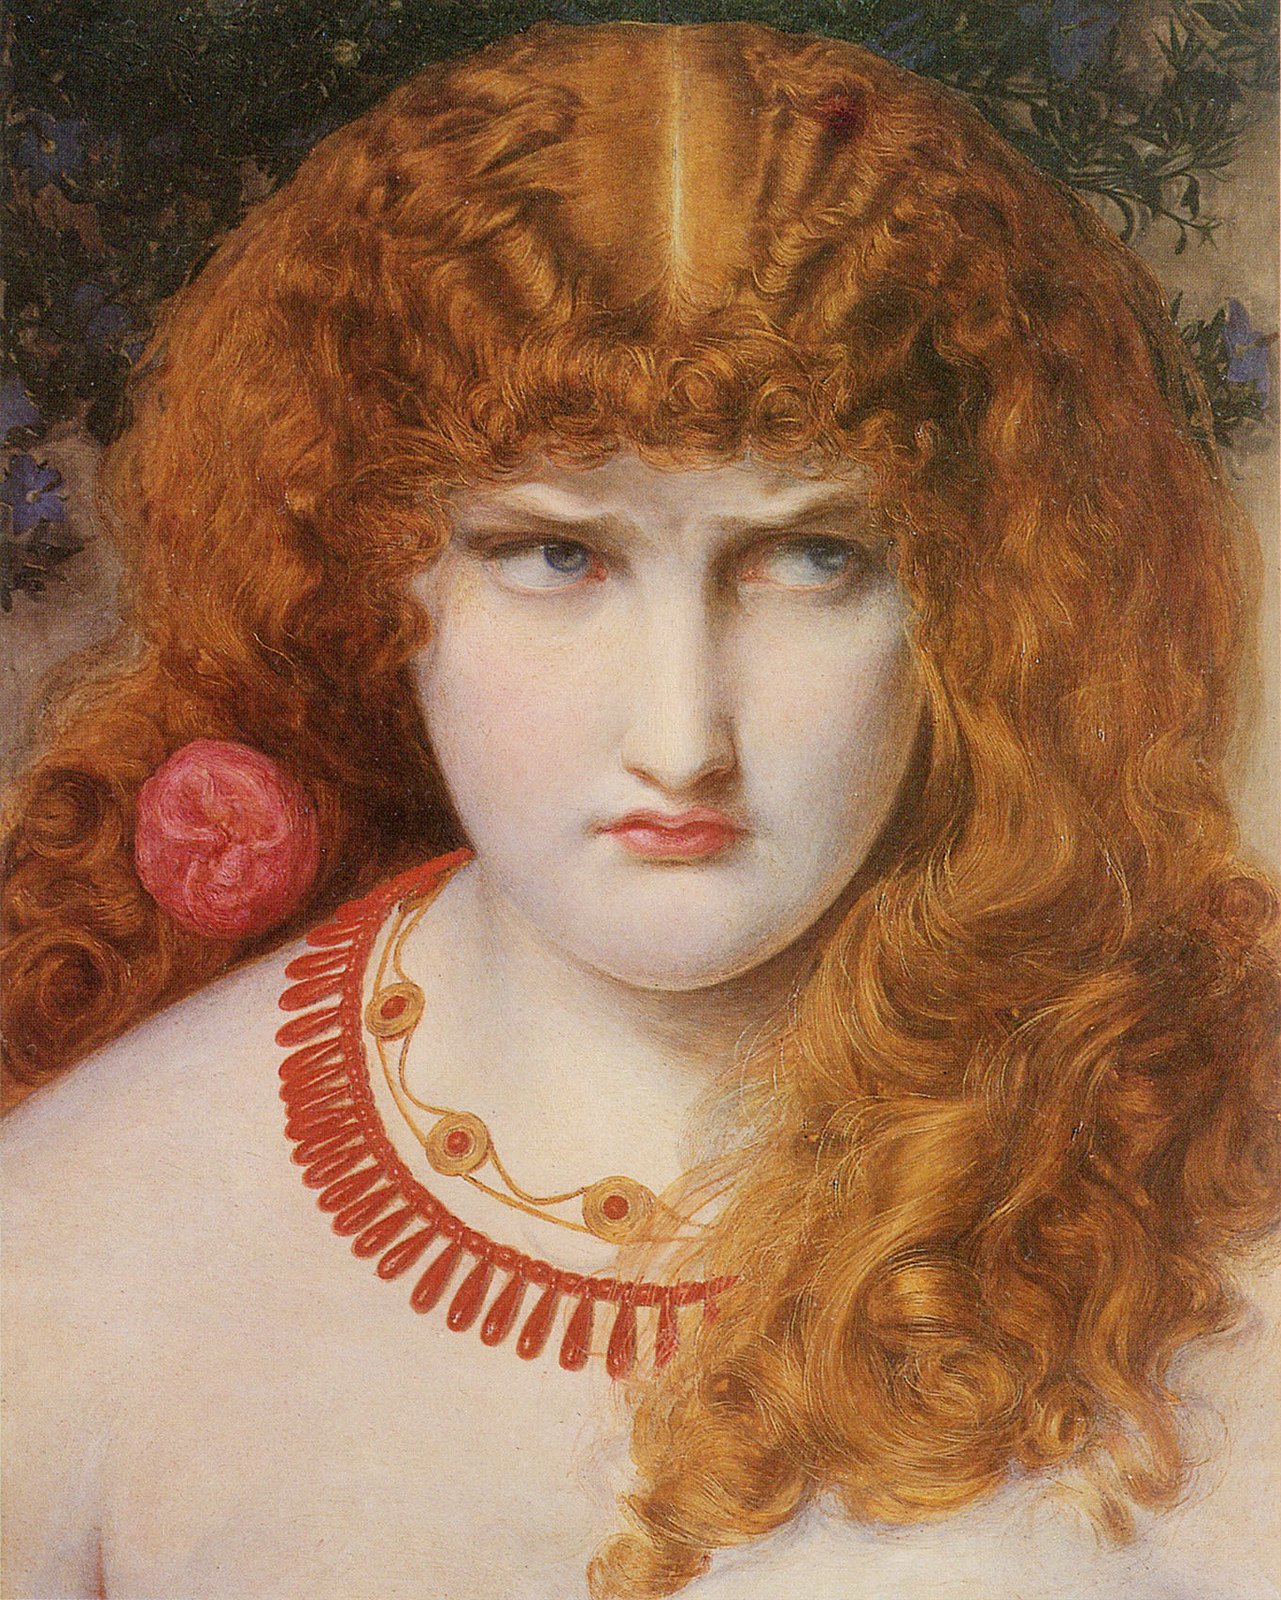 A painting of Helen of Troy with vivid red hair and a worried look on her face